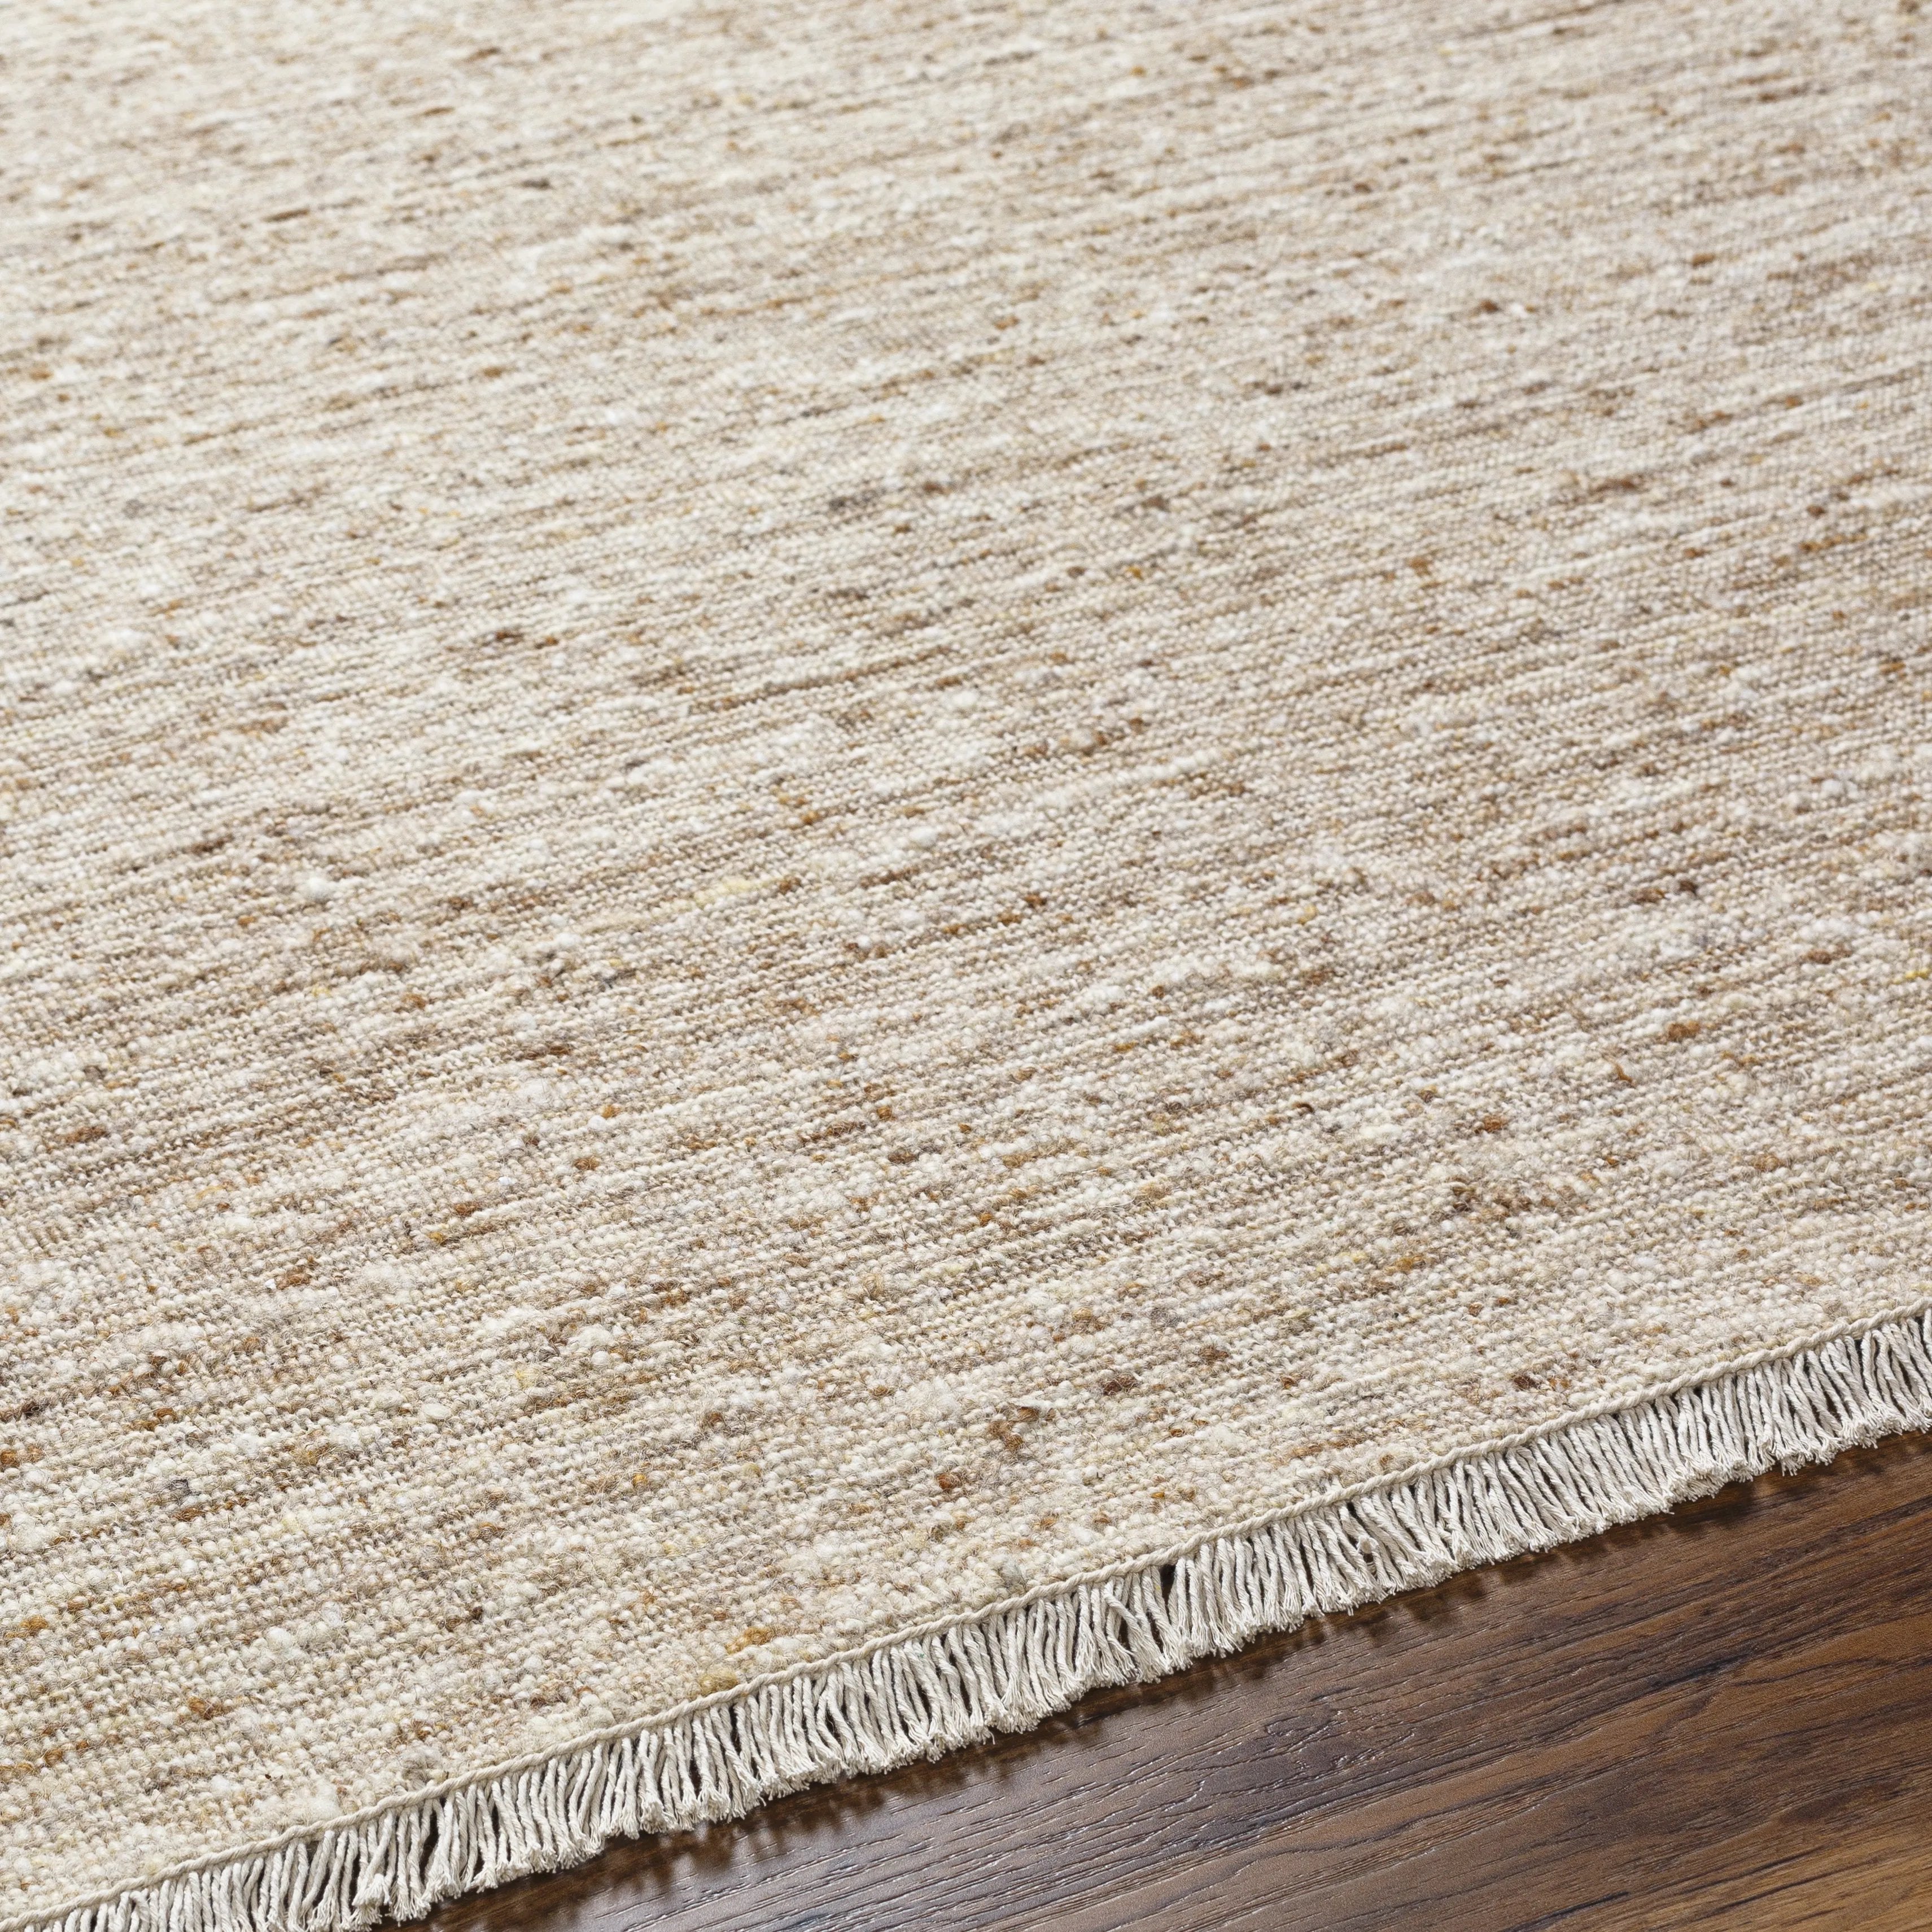 A modern, heathered warm beige look.  This is a great rug if you have other dominant design features in a space like a striking fireplace or standout patterns Amethyst Home provides interior design, new home construction design consulting, vintage area rugs, and lighting in the Kansas City metro area.